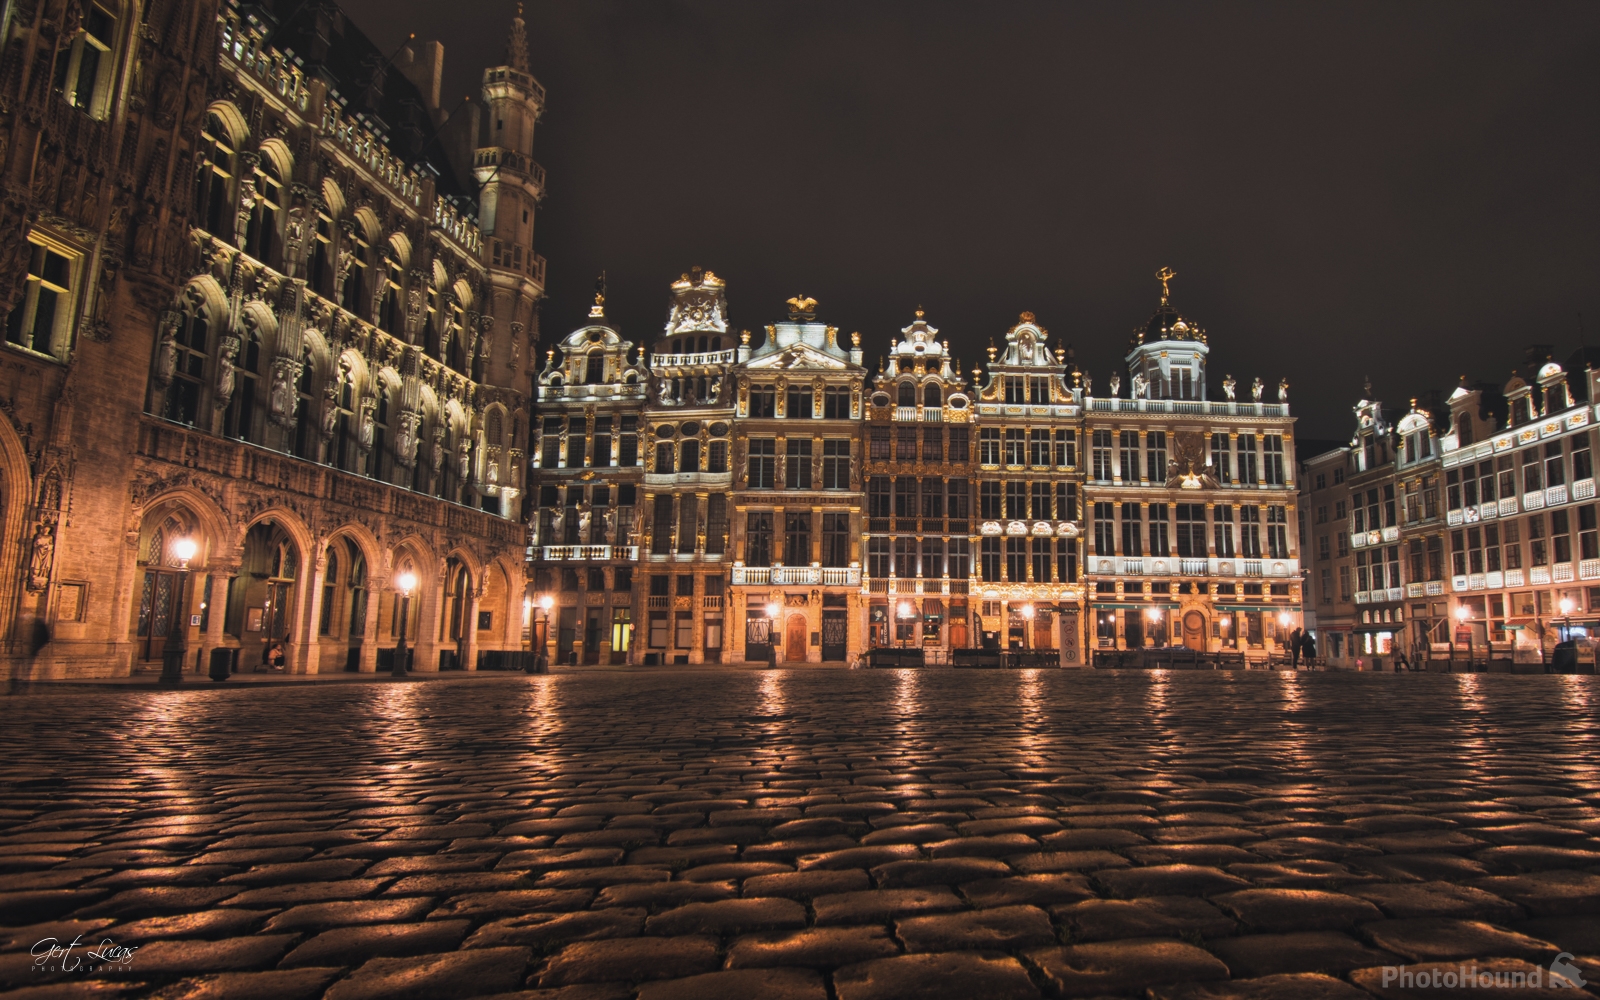 Image of Grand Place by Gert Lucas